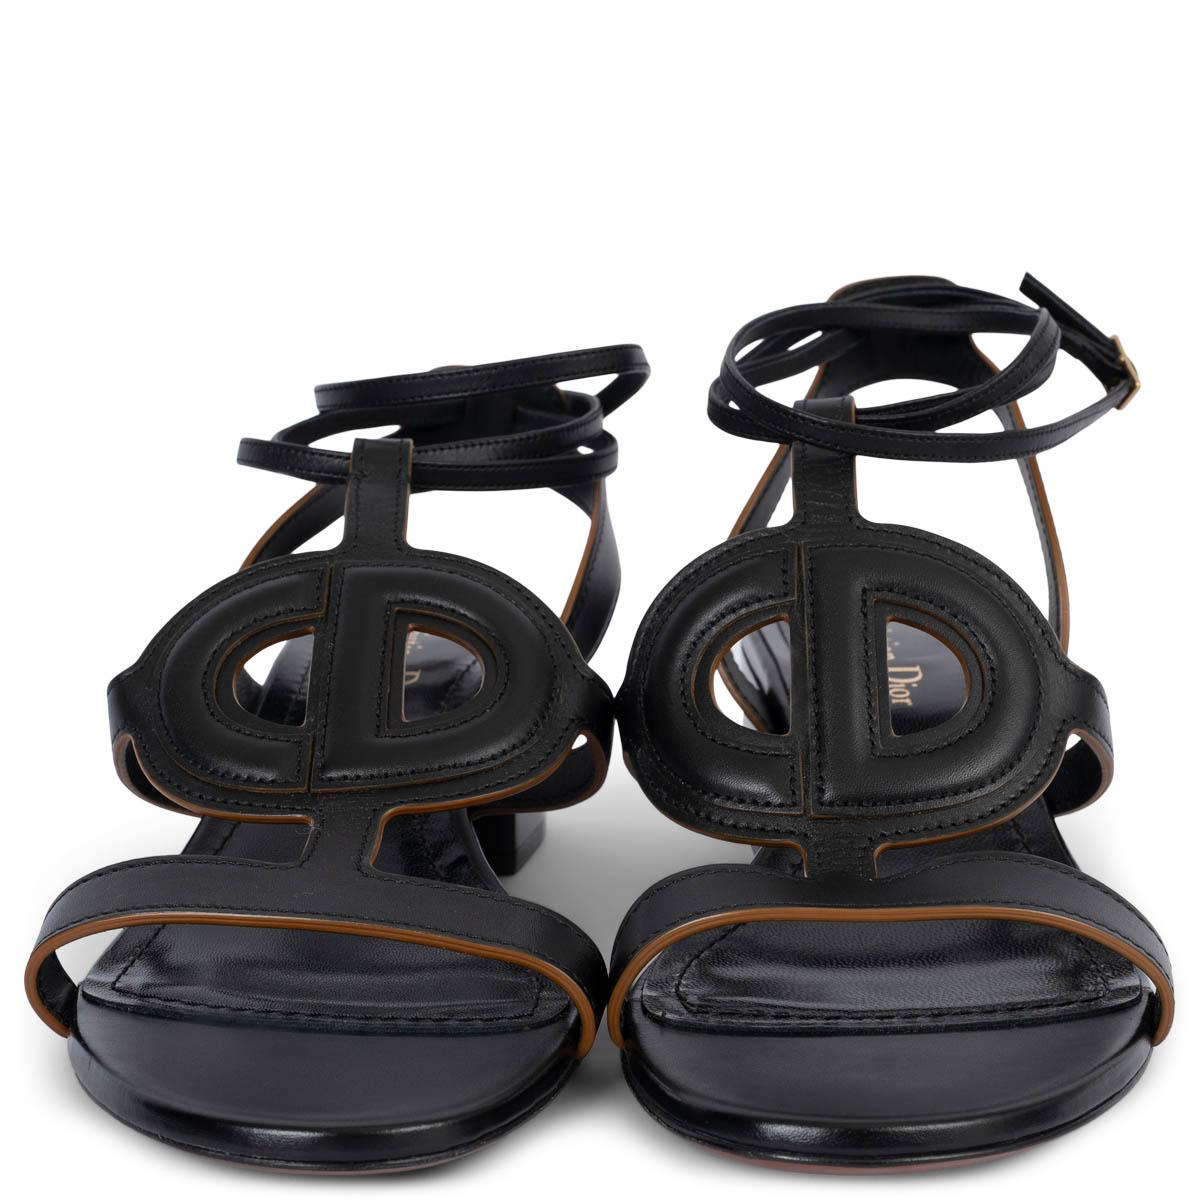 100% authentic Christian Dior D-Club block-heel black leather finished with a camel colored edge. The thin strap wraps around the ankle and closes with a gold colored buckle. On the front of the sandal you can find the big but discrete CD logo.